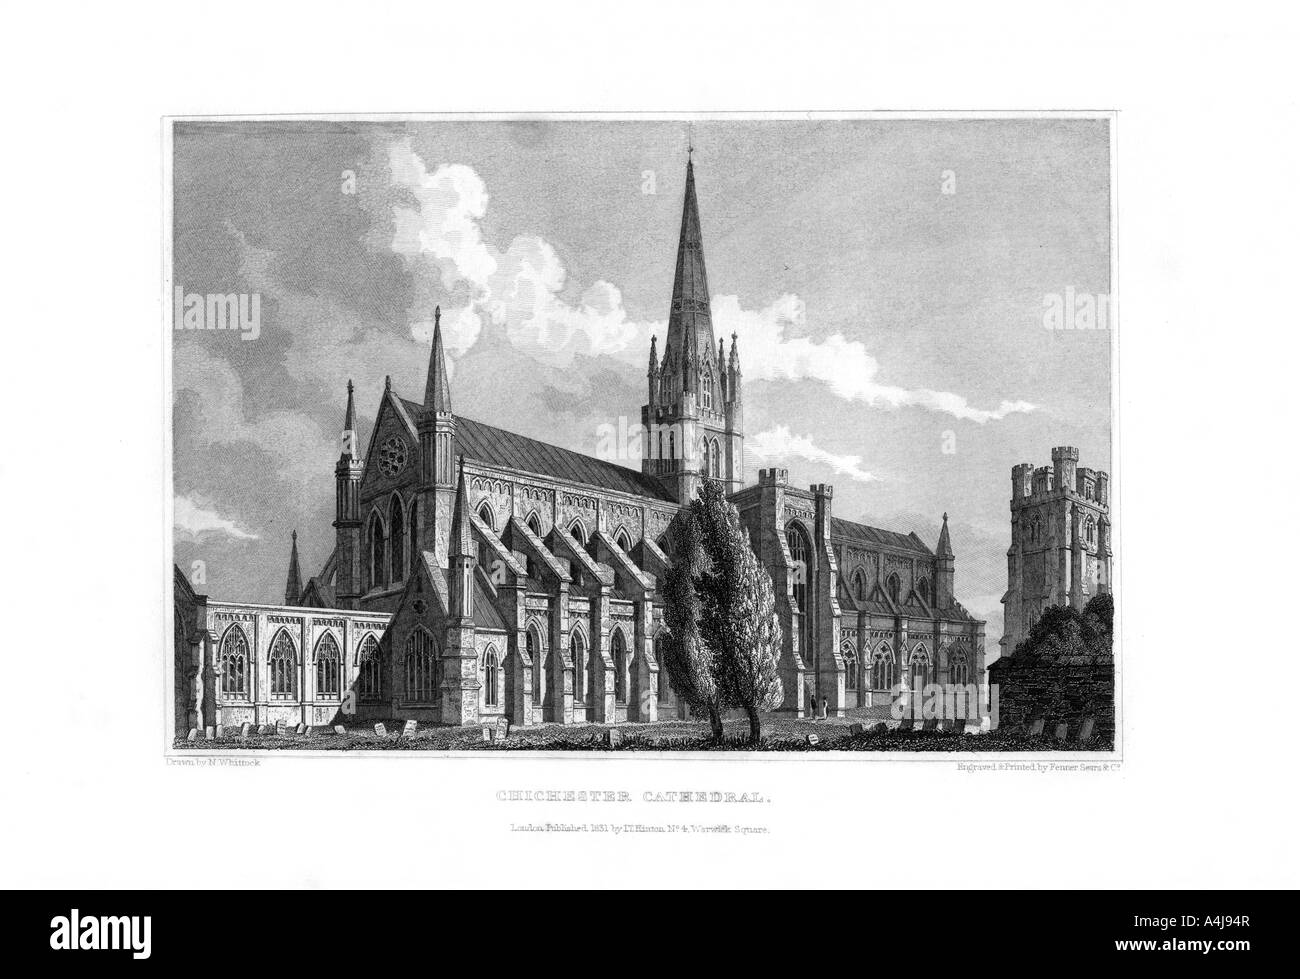 Chichester Cathedral, Chichester, West Sussex, 1829.Artist: Fenner, Sears & Co Stock Photo